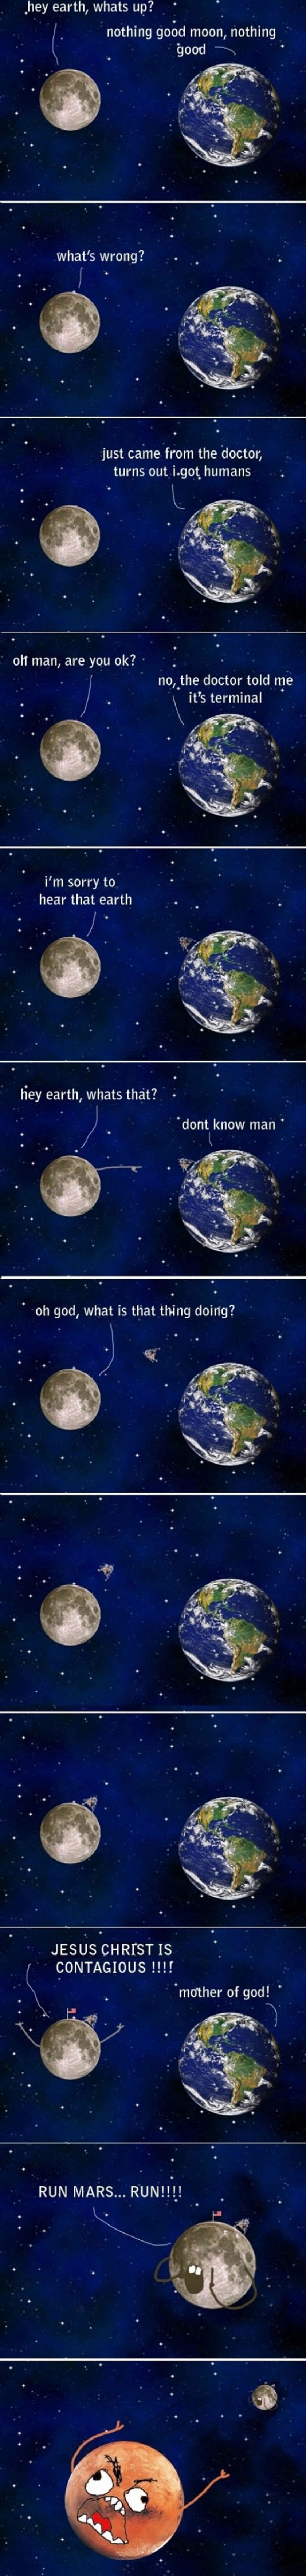 Earth, What’s Up?